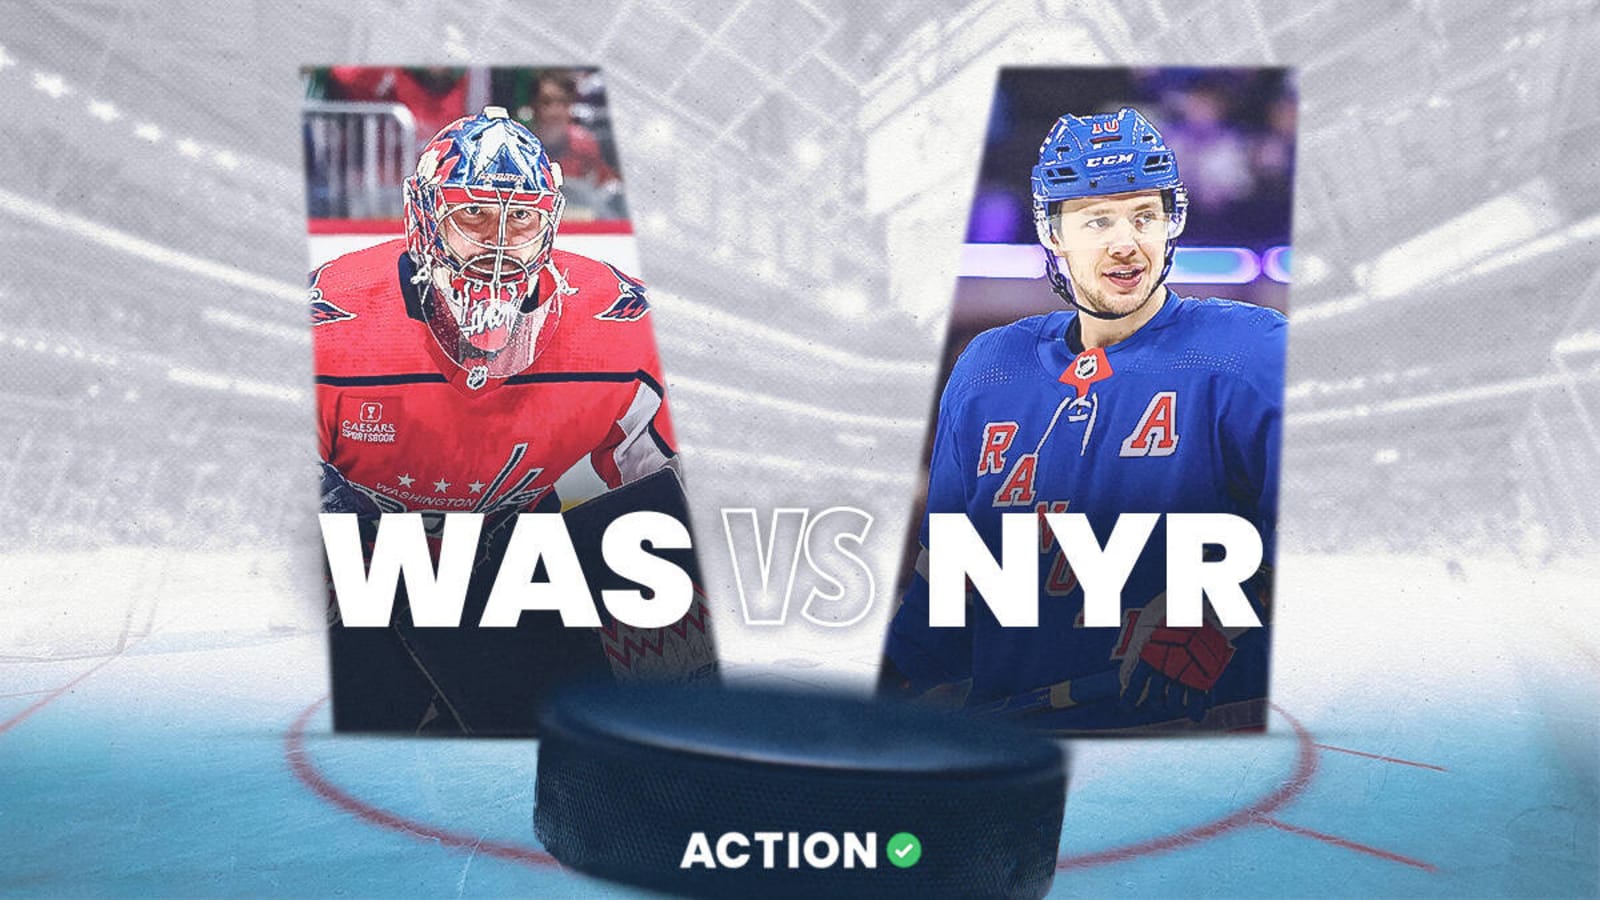 Capitals vs. Rangers: Top two bets for Sunday's matchup